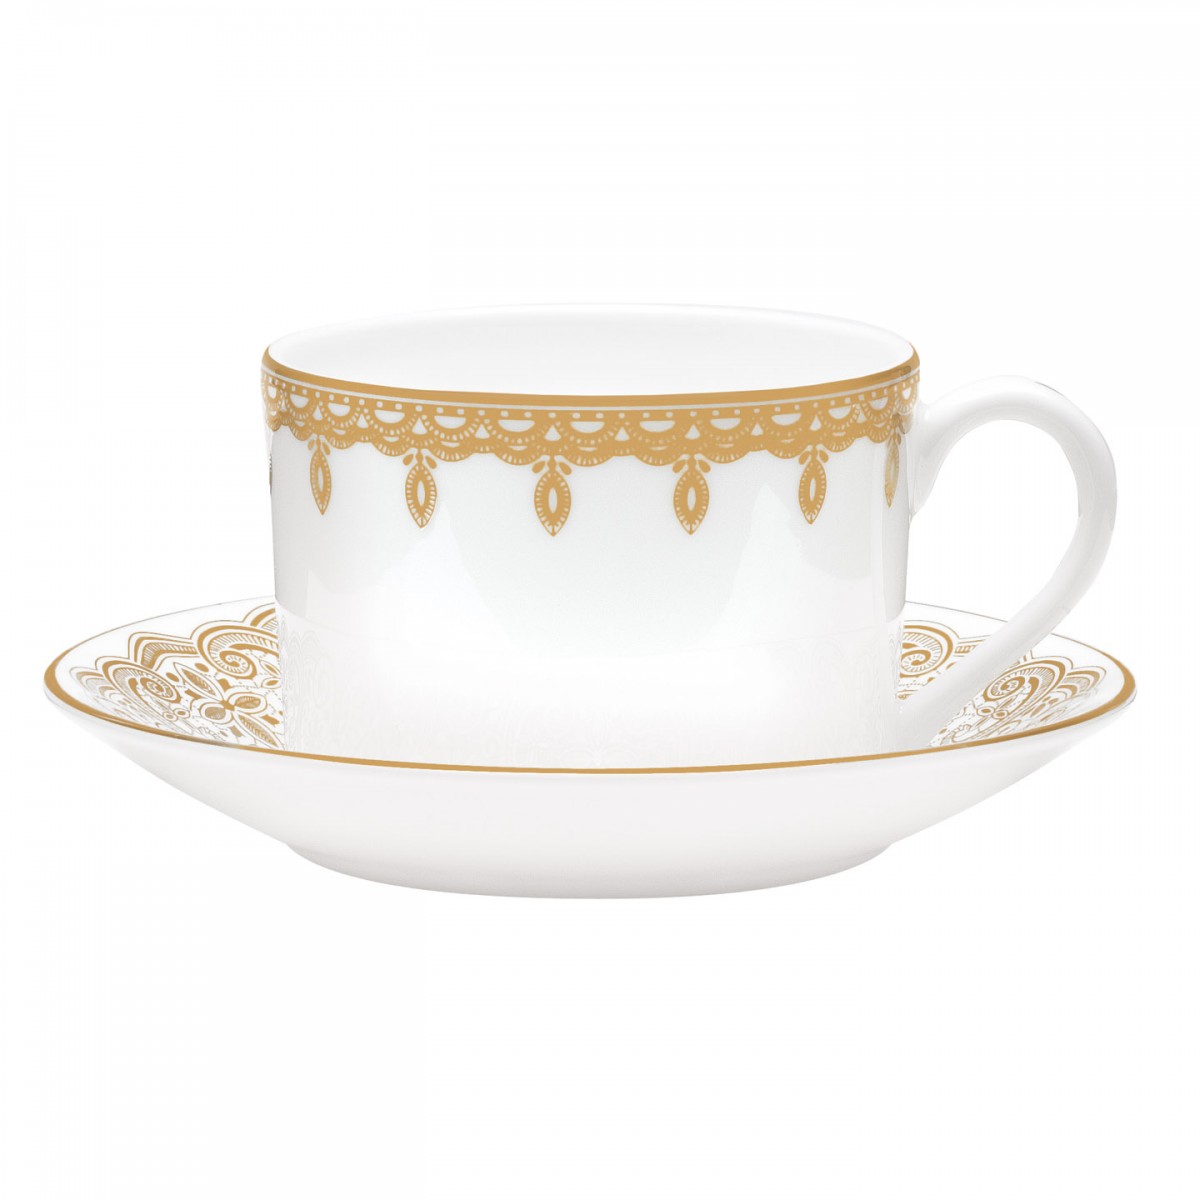 waterford-lismore-lace-gold-teacup-and-saucer.jpg